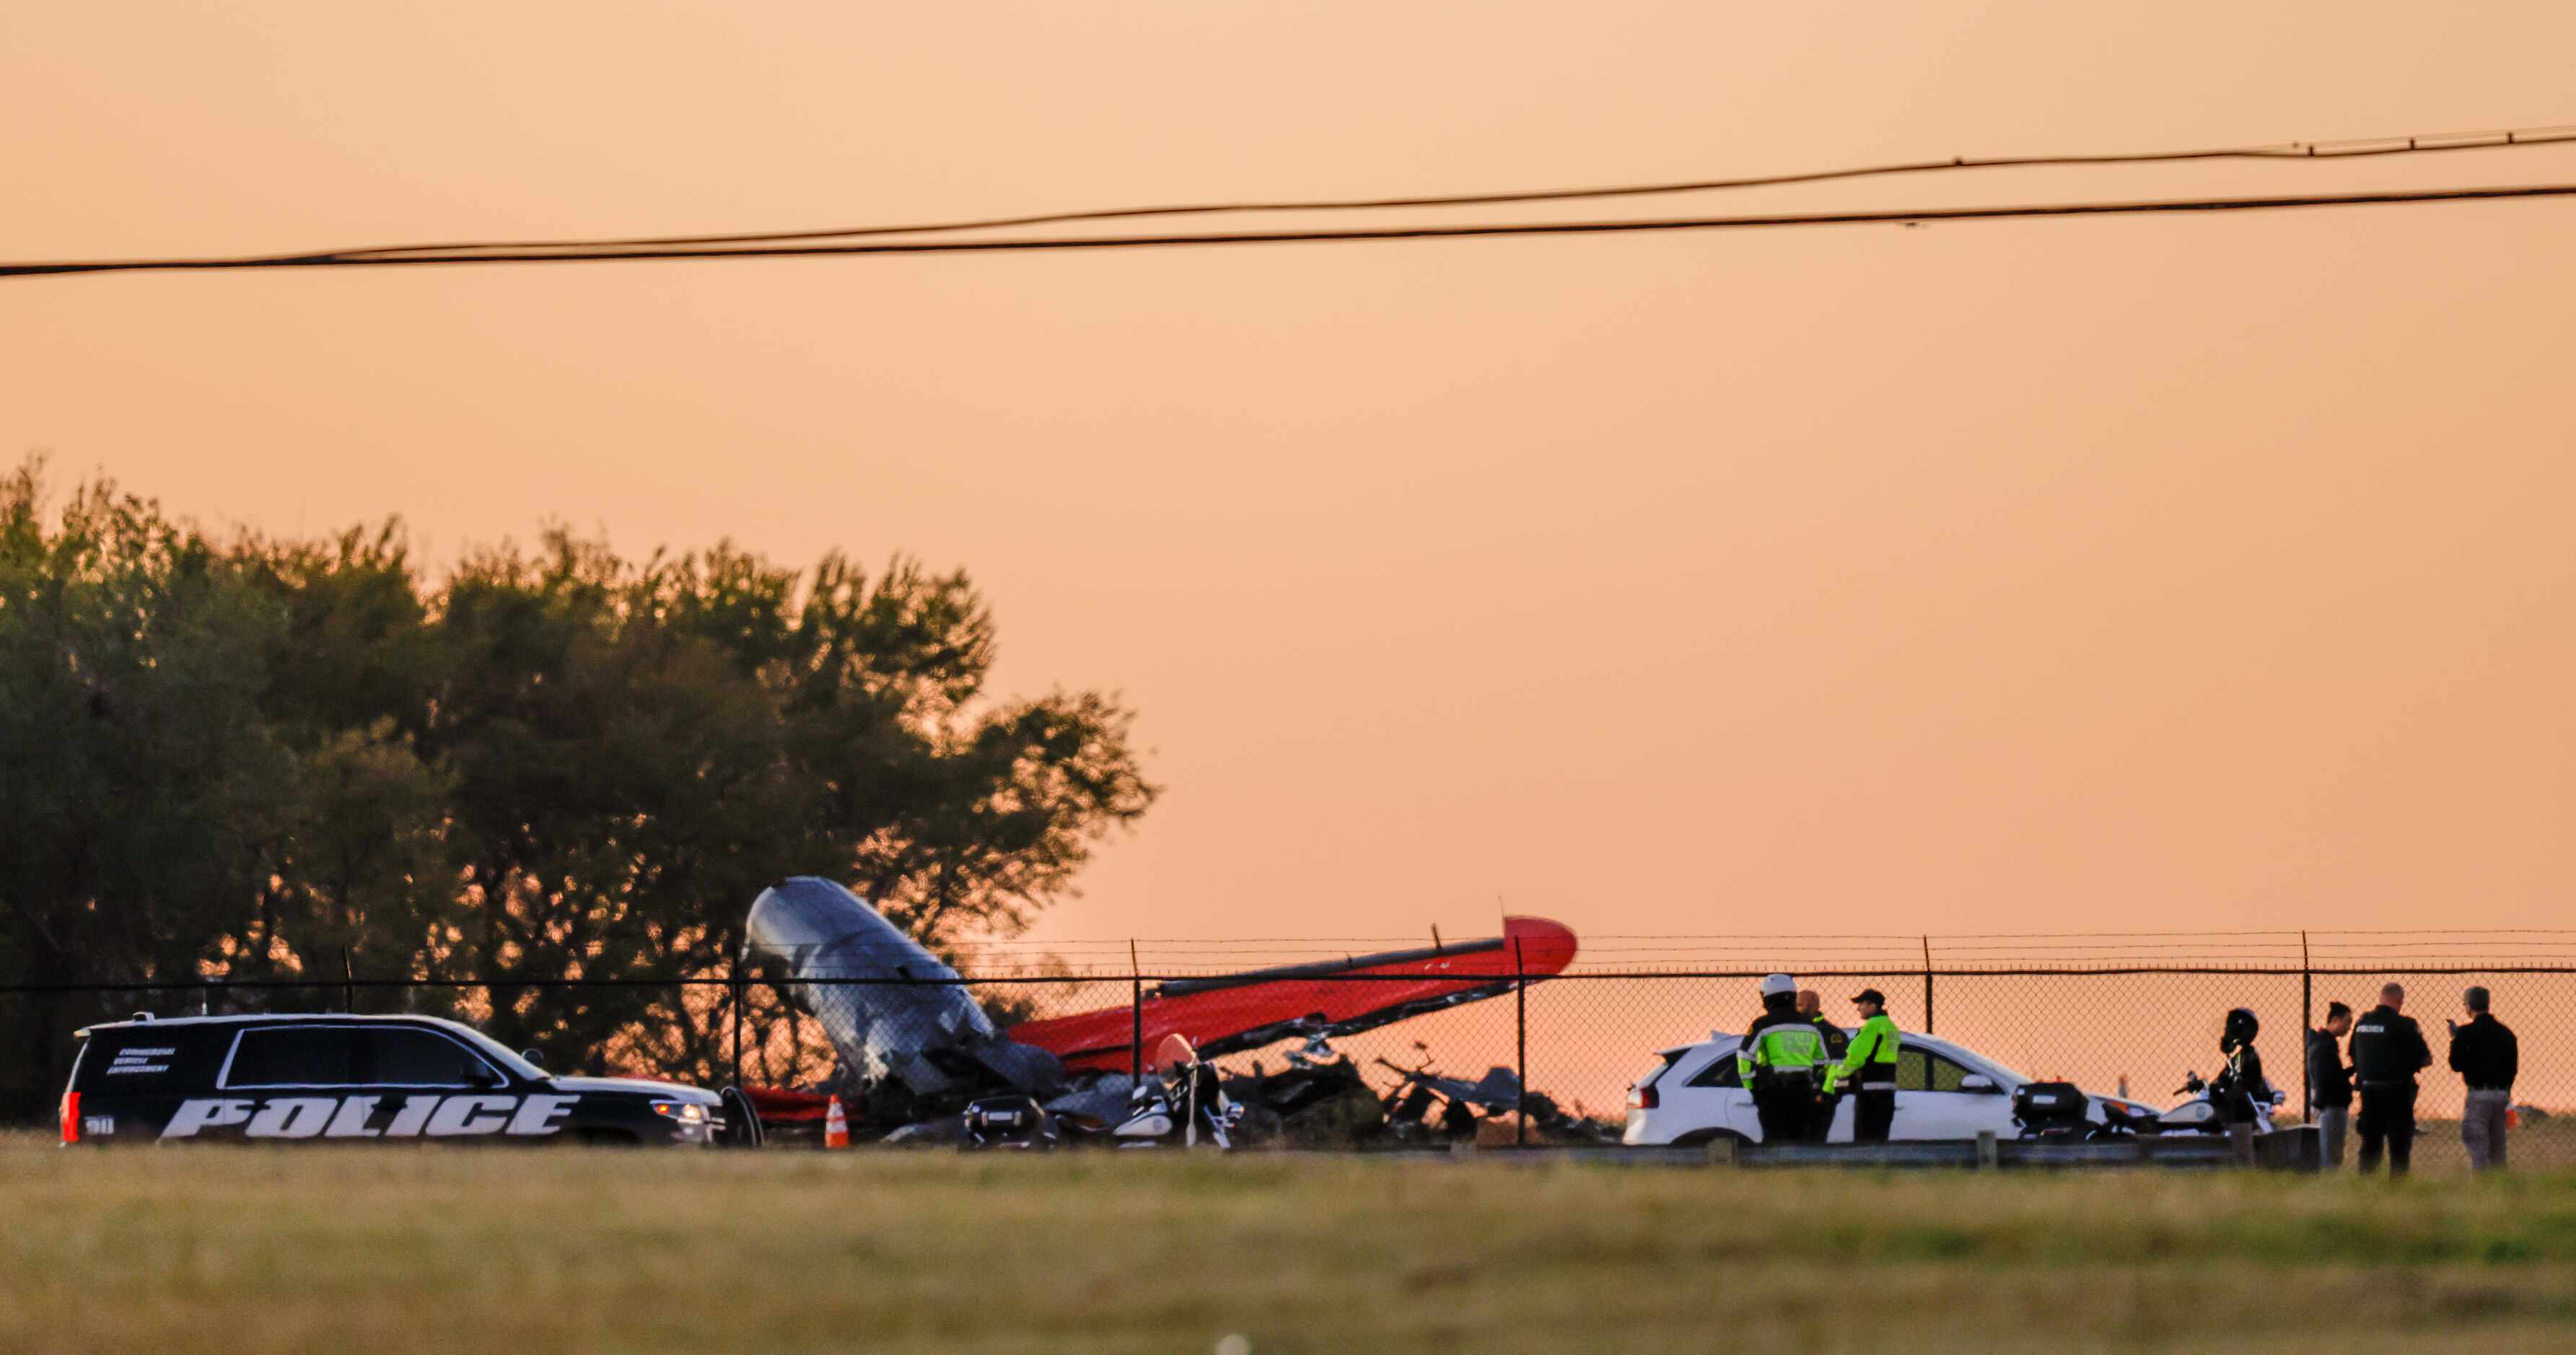 The sun begins to set over the damage from a mid-air collision between two planes that sits...